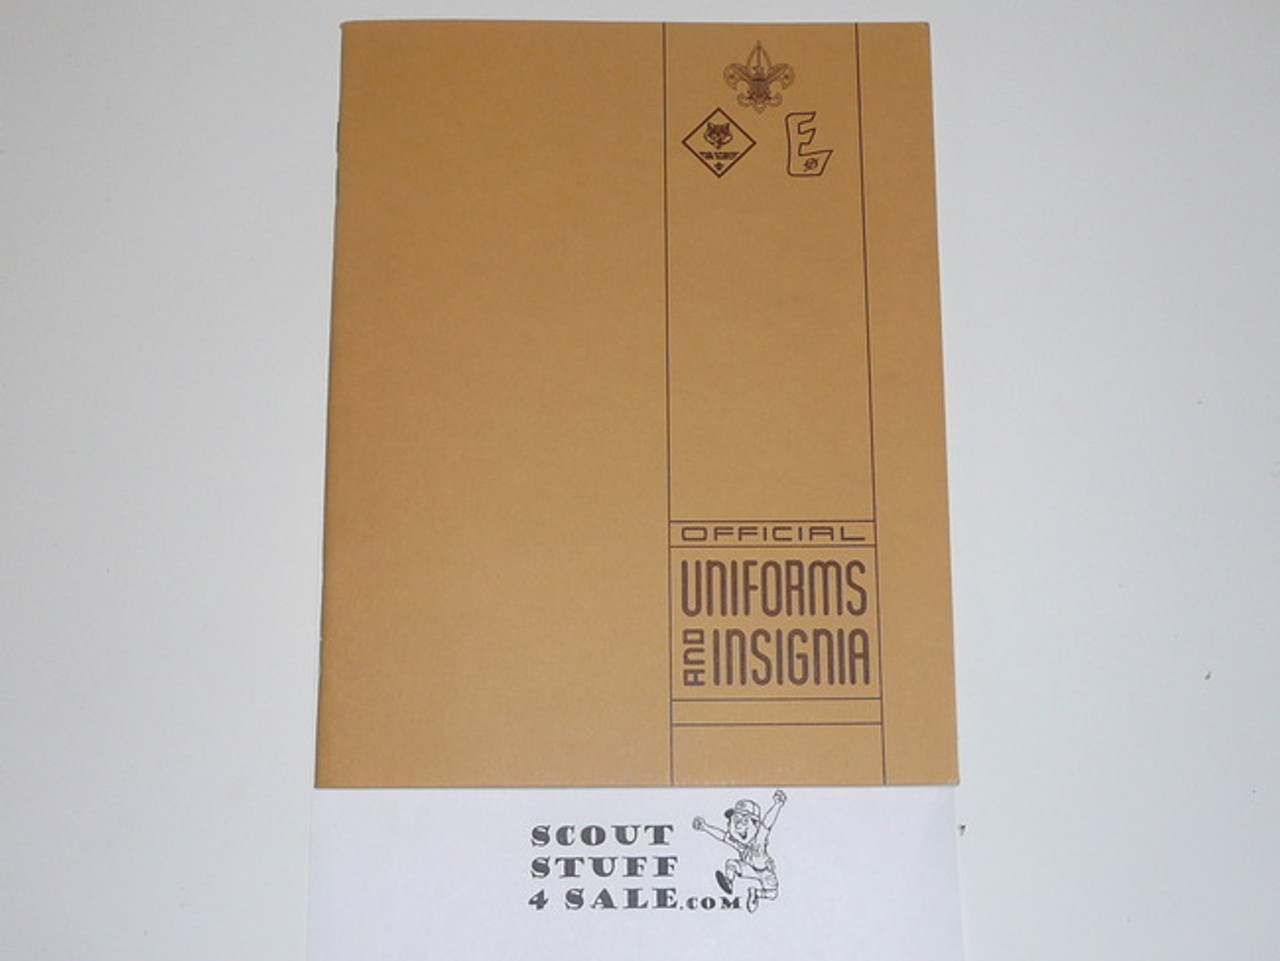 1973 Official Uniforms and Insignia Guide, 5-73 Printing